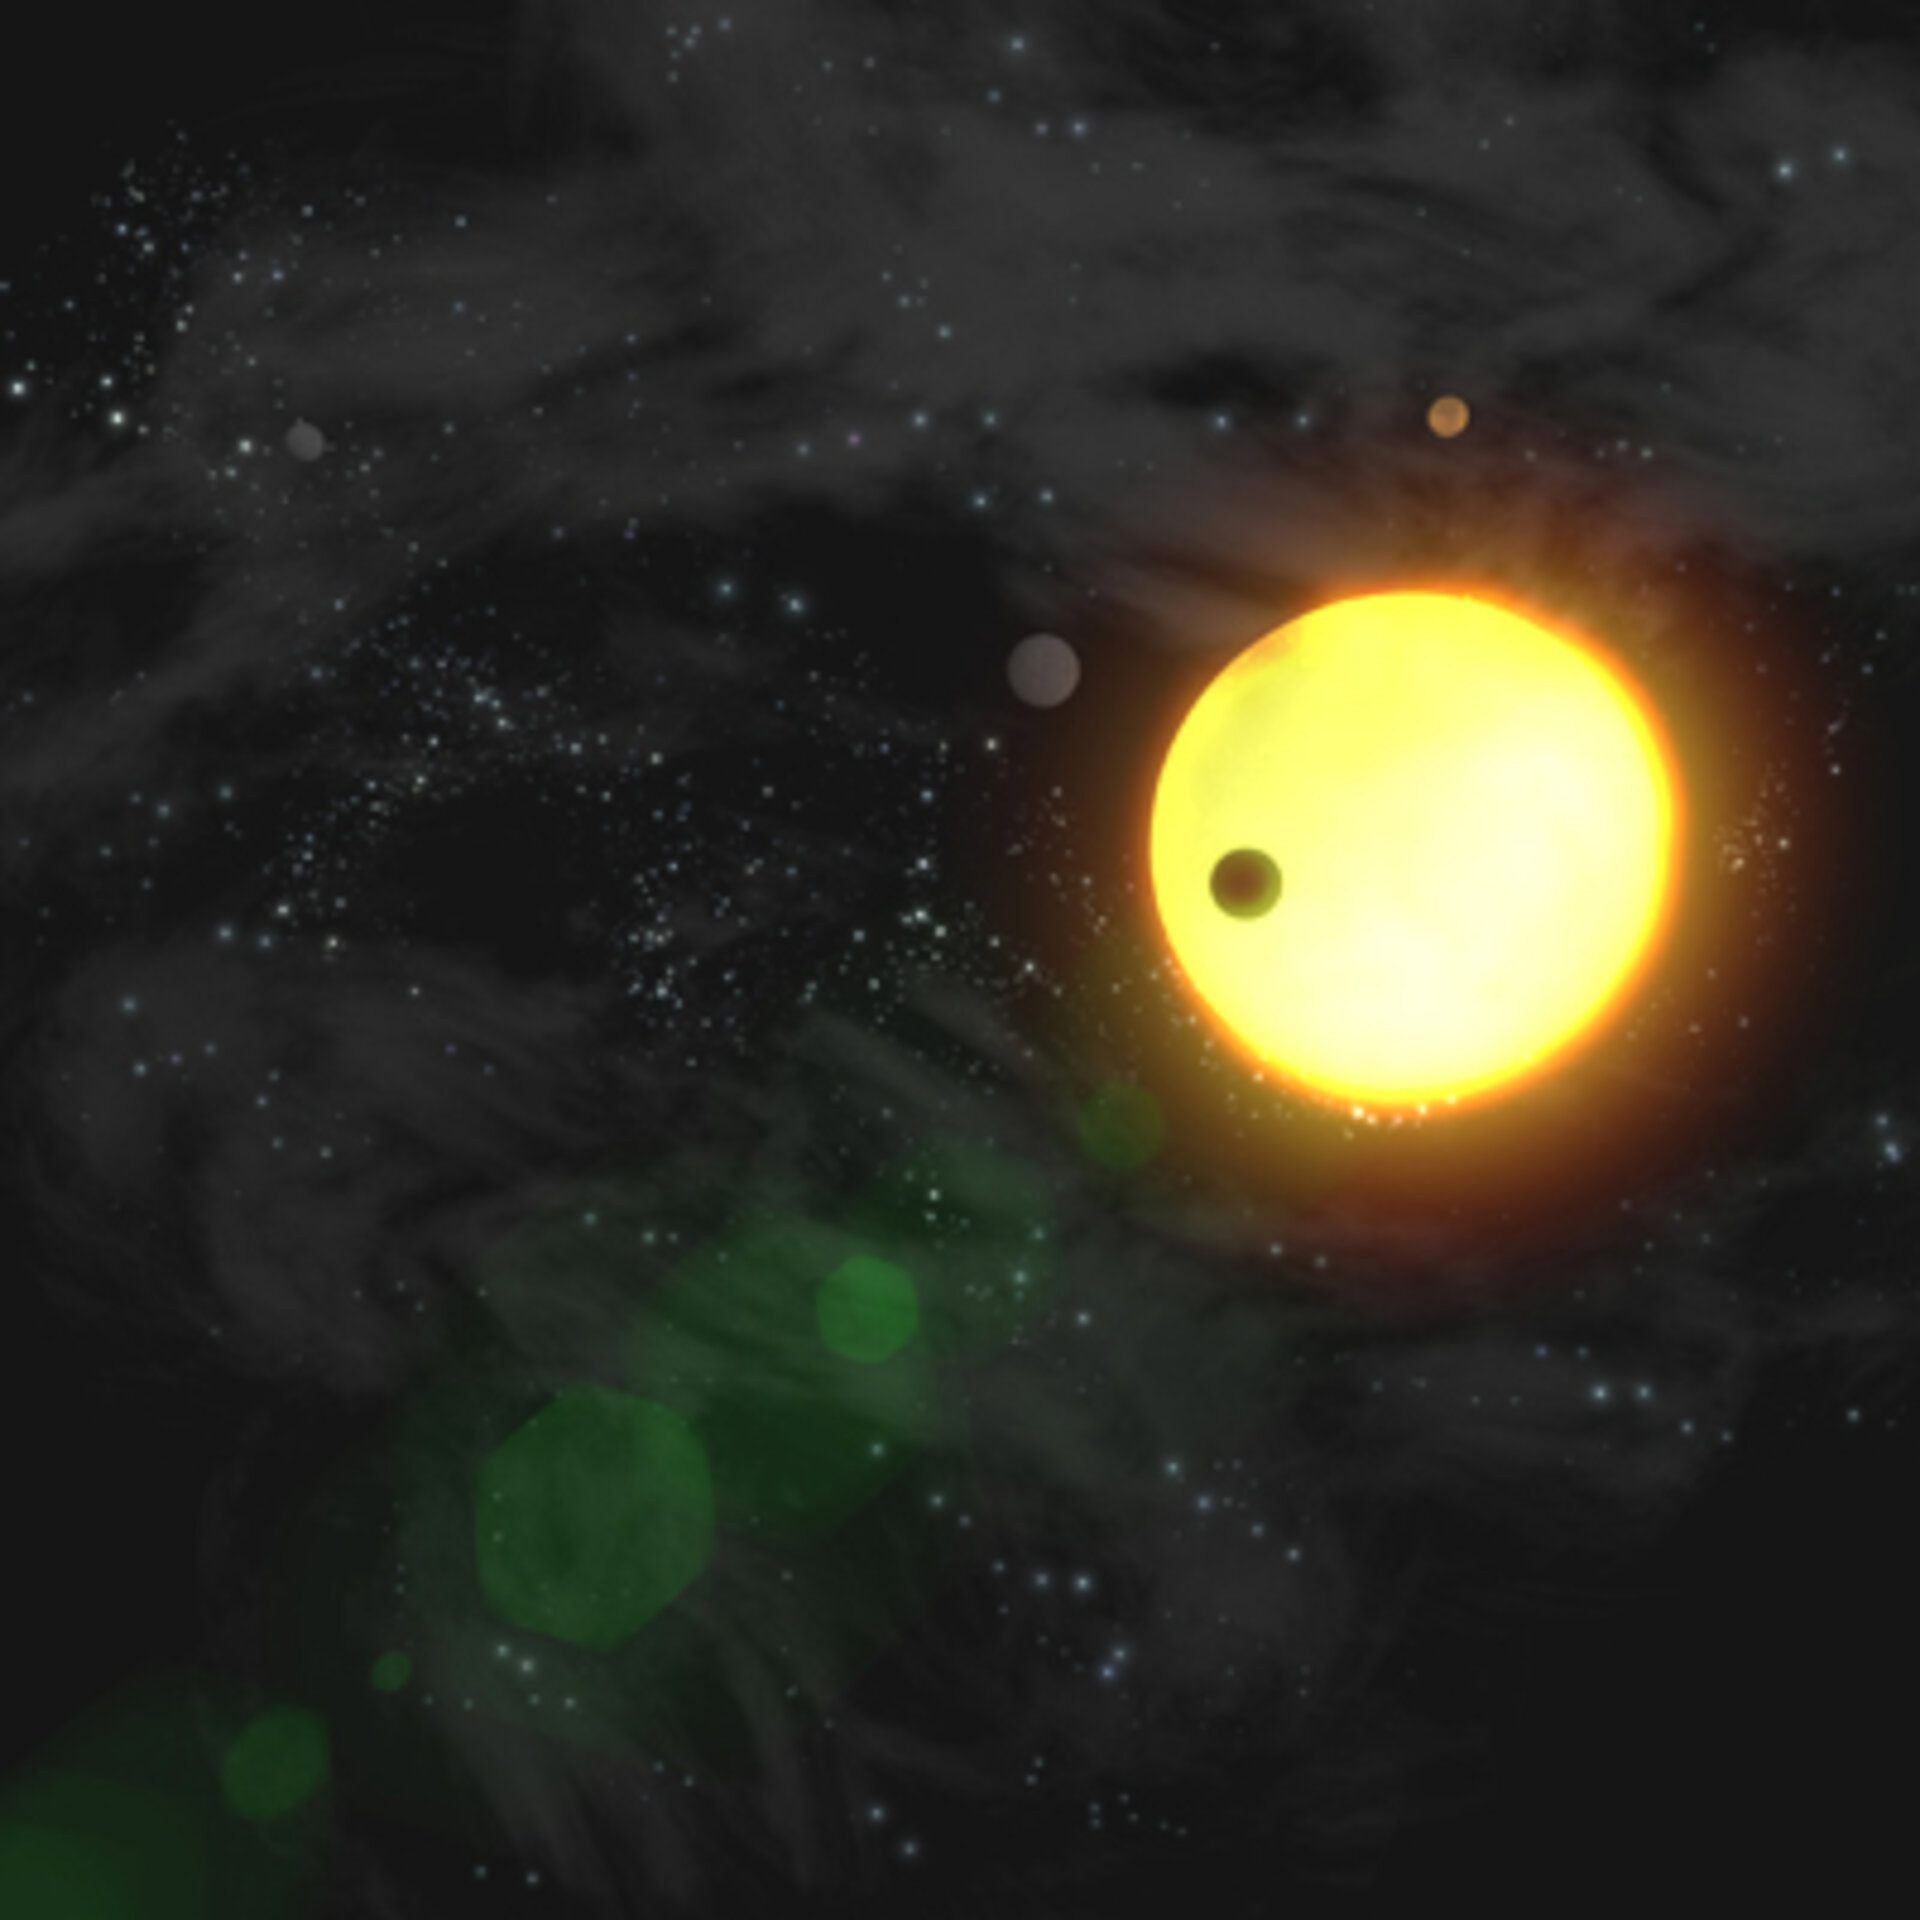 Artistic impression of Exoplanet transiting a star